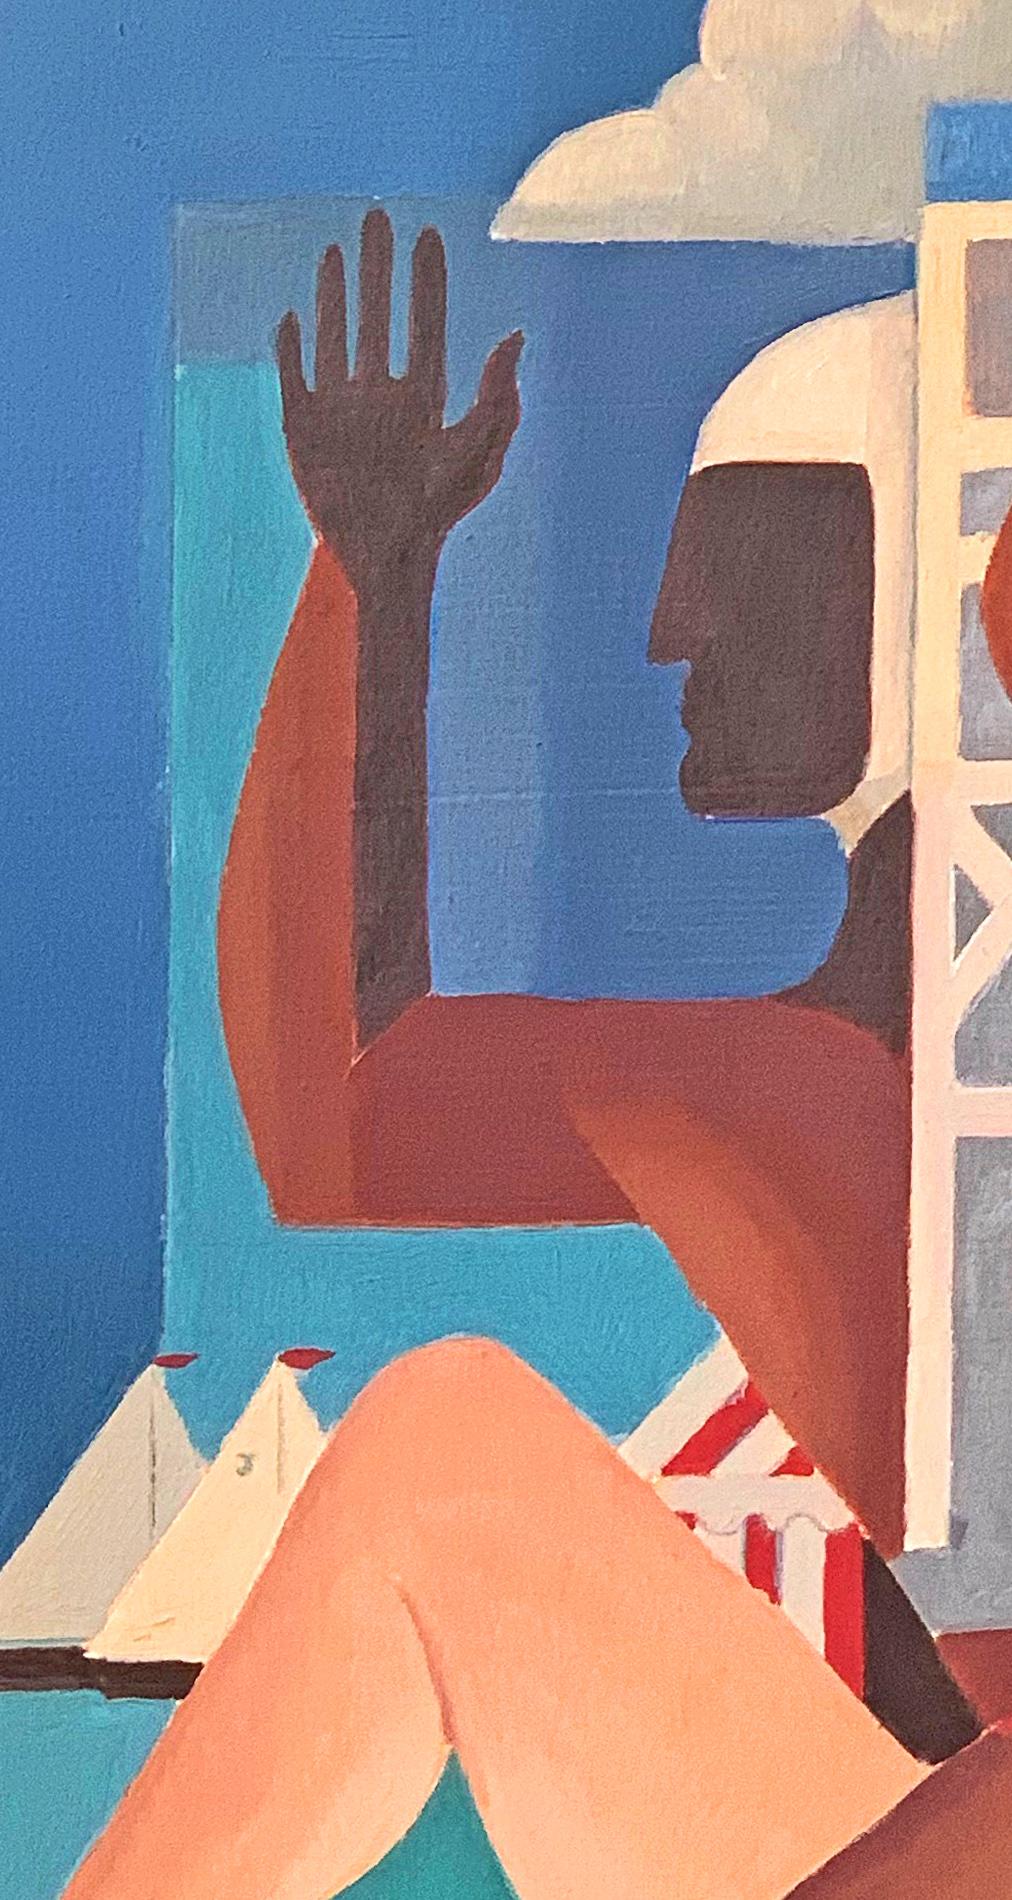 Reminiscent of the work of Gerald Murphy in its use of strong colors and flat, highly-stylized forms, this depiction of a lifeguard in profile, a female bather-cum-mermaid with a fashionable hat and starfish hands, and sailboats in the distance, is